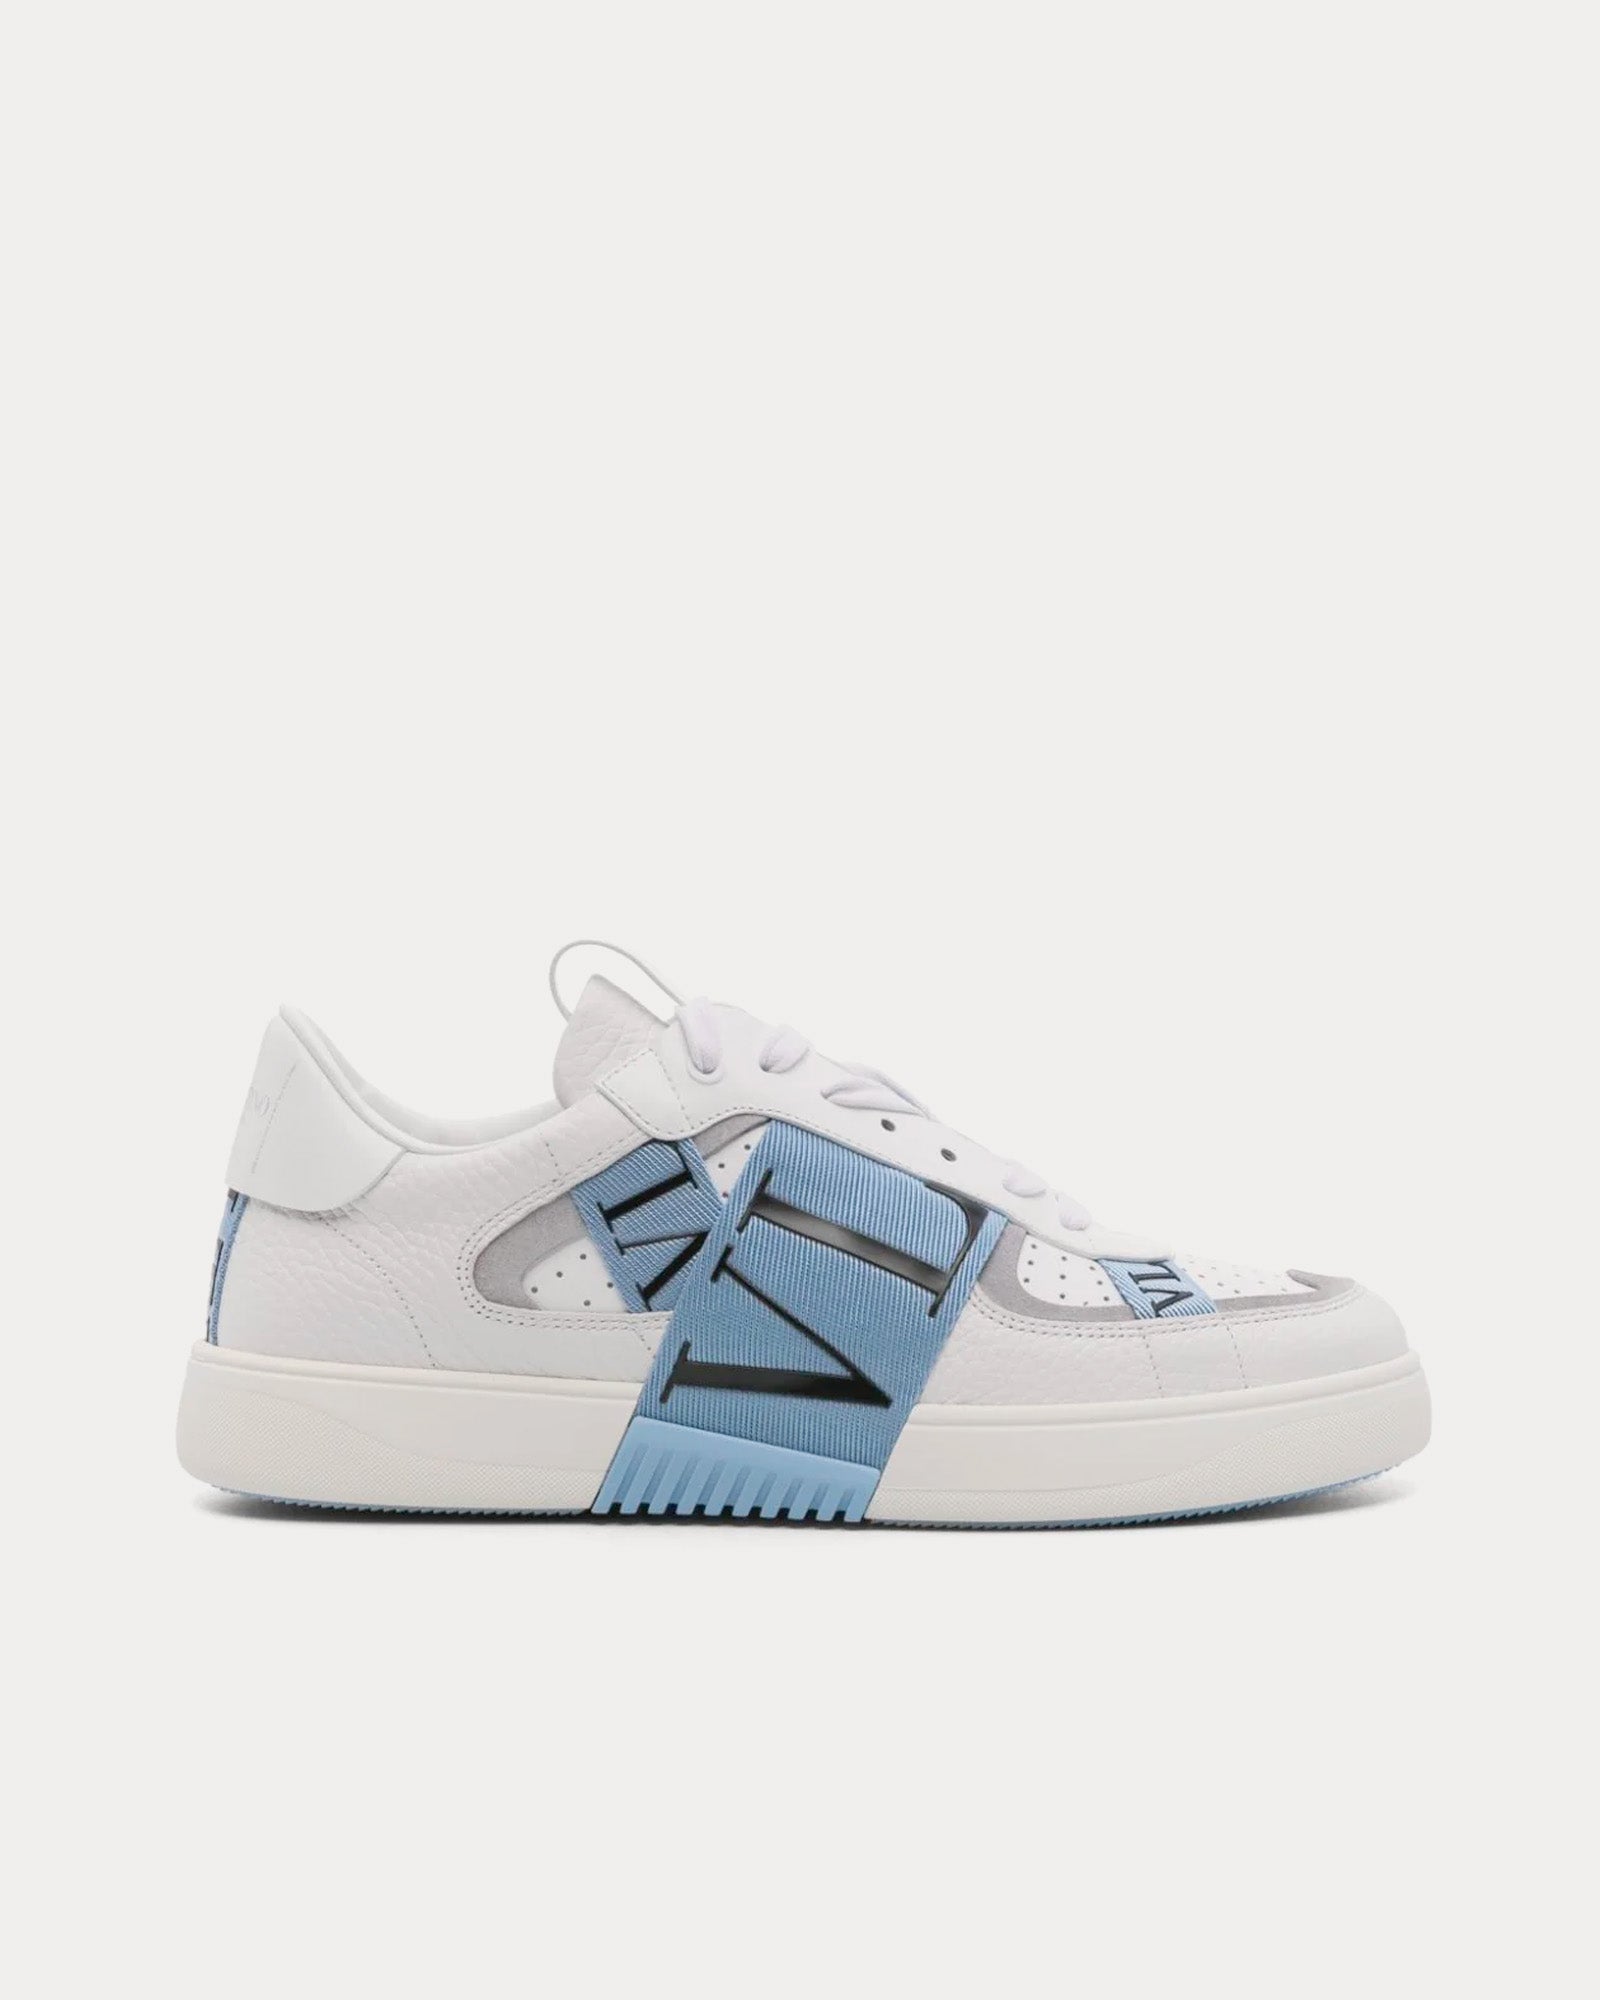 Valentino - VL7N Calfskin & Fabric Banded White / Blue / Grey Low Top Sneakers